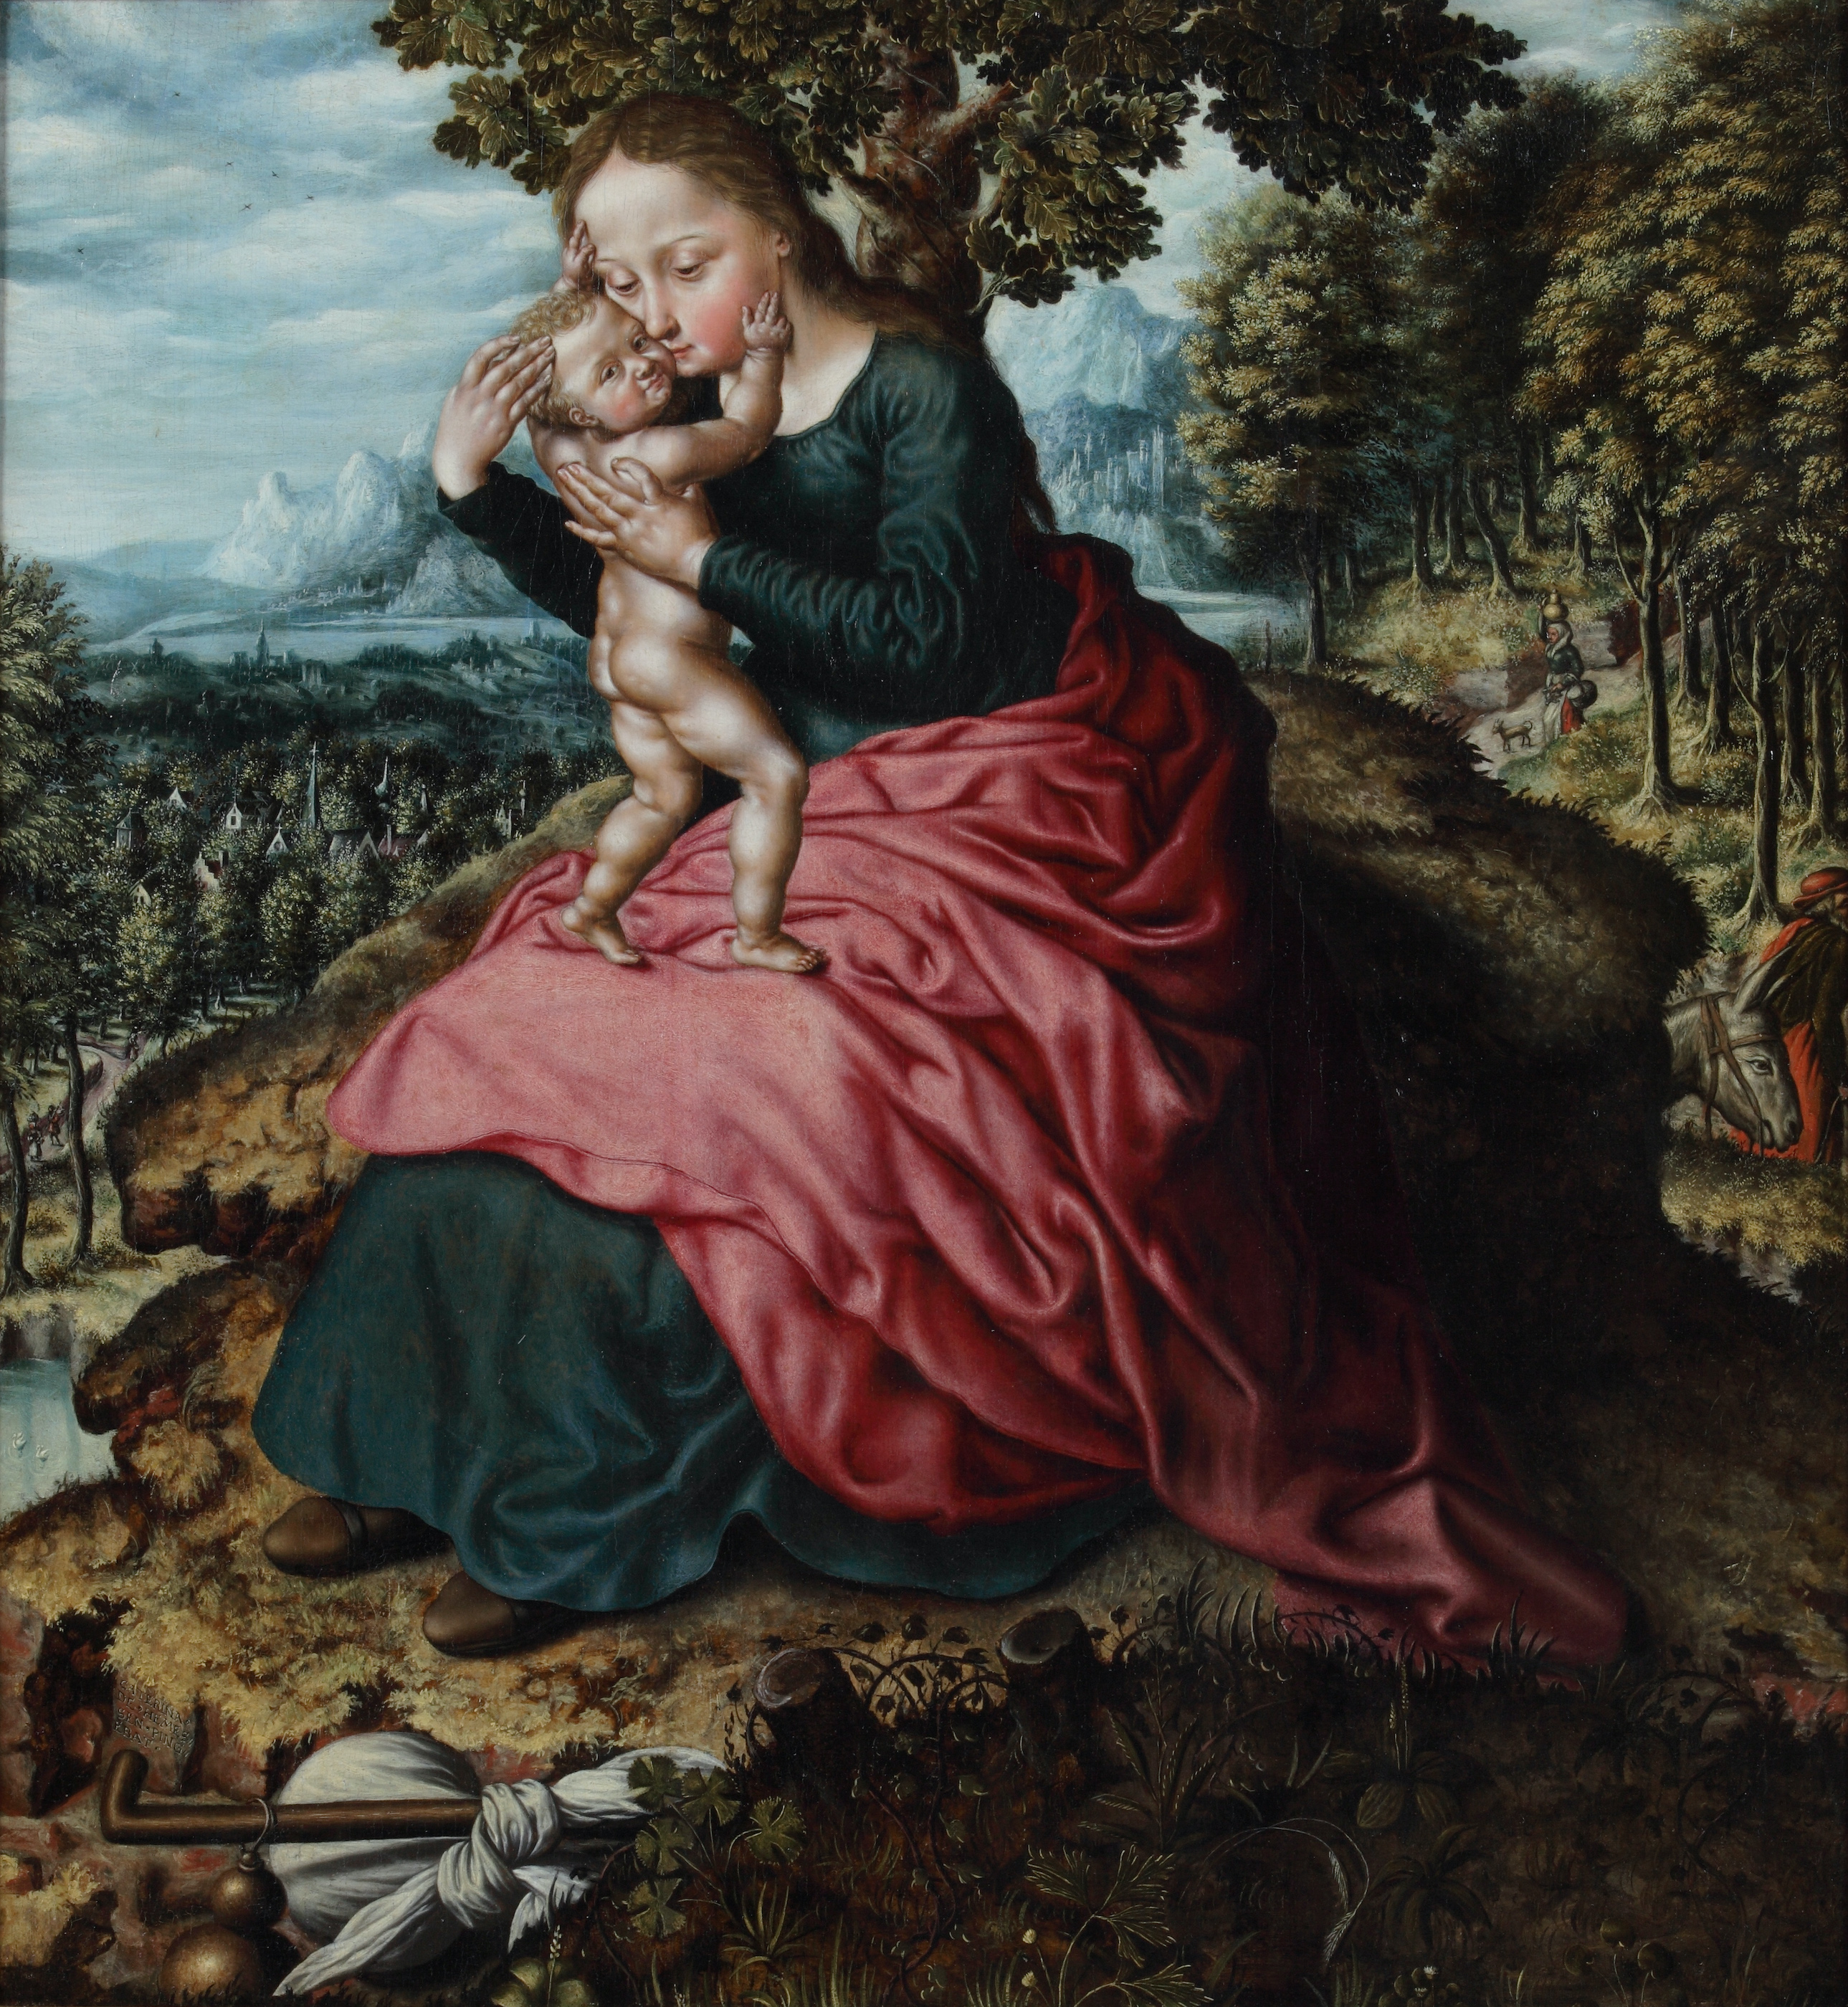 Rest on the Flight into Egypt by Catharina van Hemessen - c. 1550 - 75 x 69.5 cm Mauritshuis, The Hague